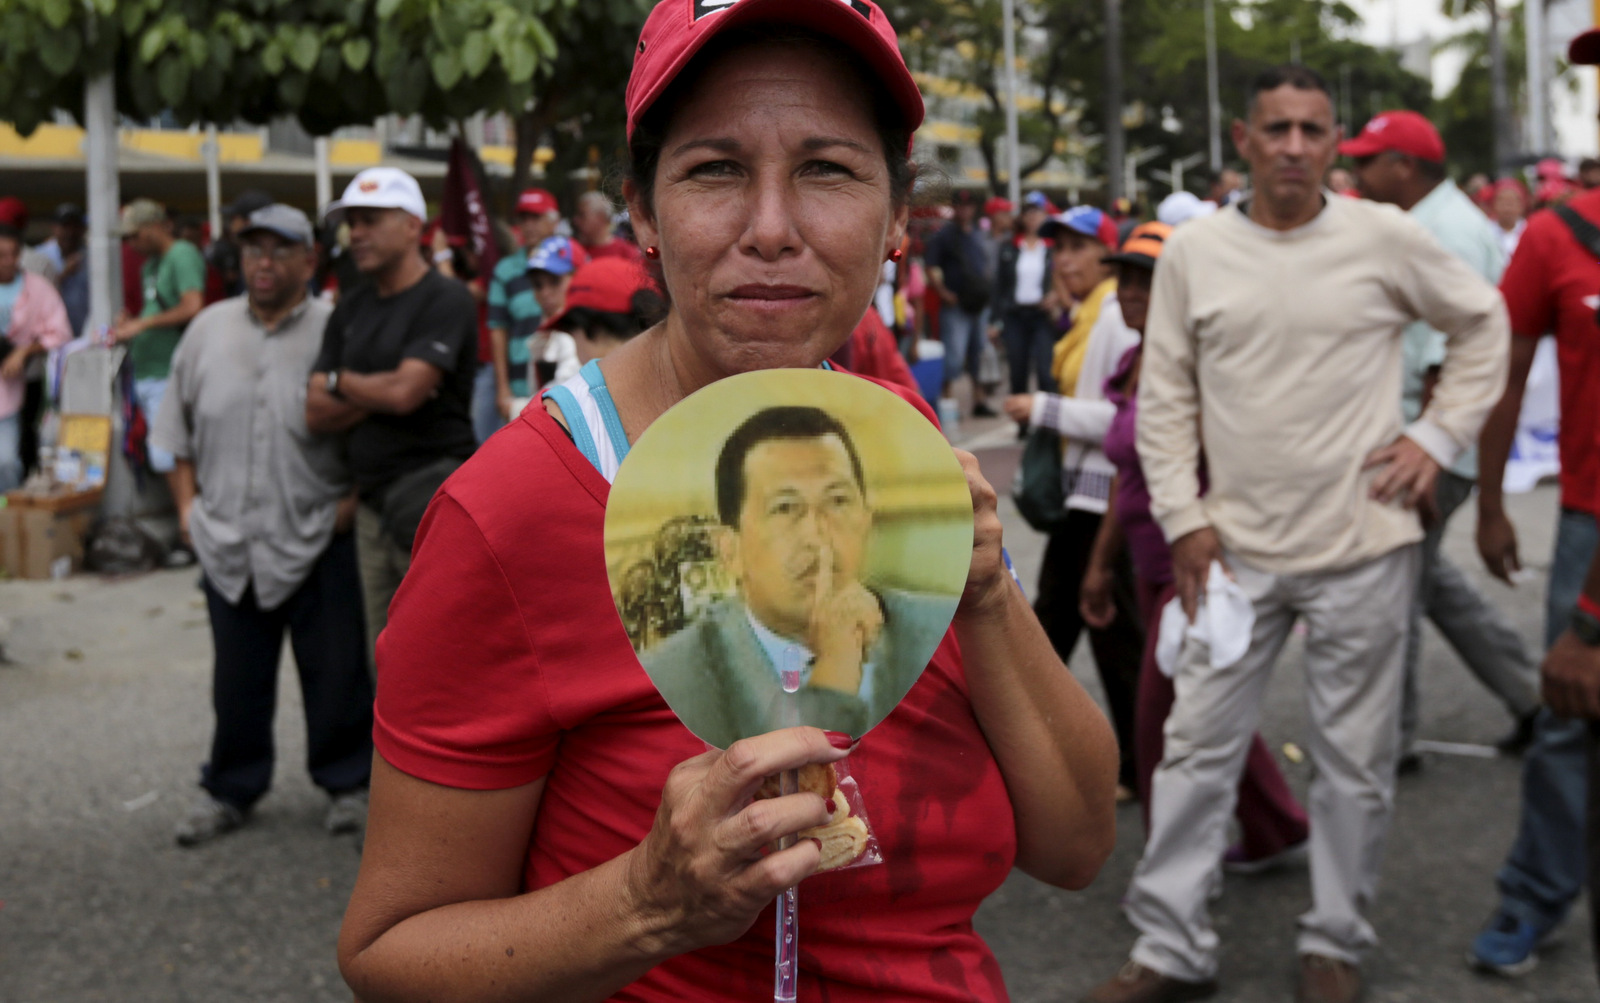 A government supporter holds an image of Venezuela's late president Hugo Chavez, during a march in Caracas, Venezuela, Wednesday, April 19, 2017. (AP/Fernando Llano)